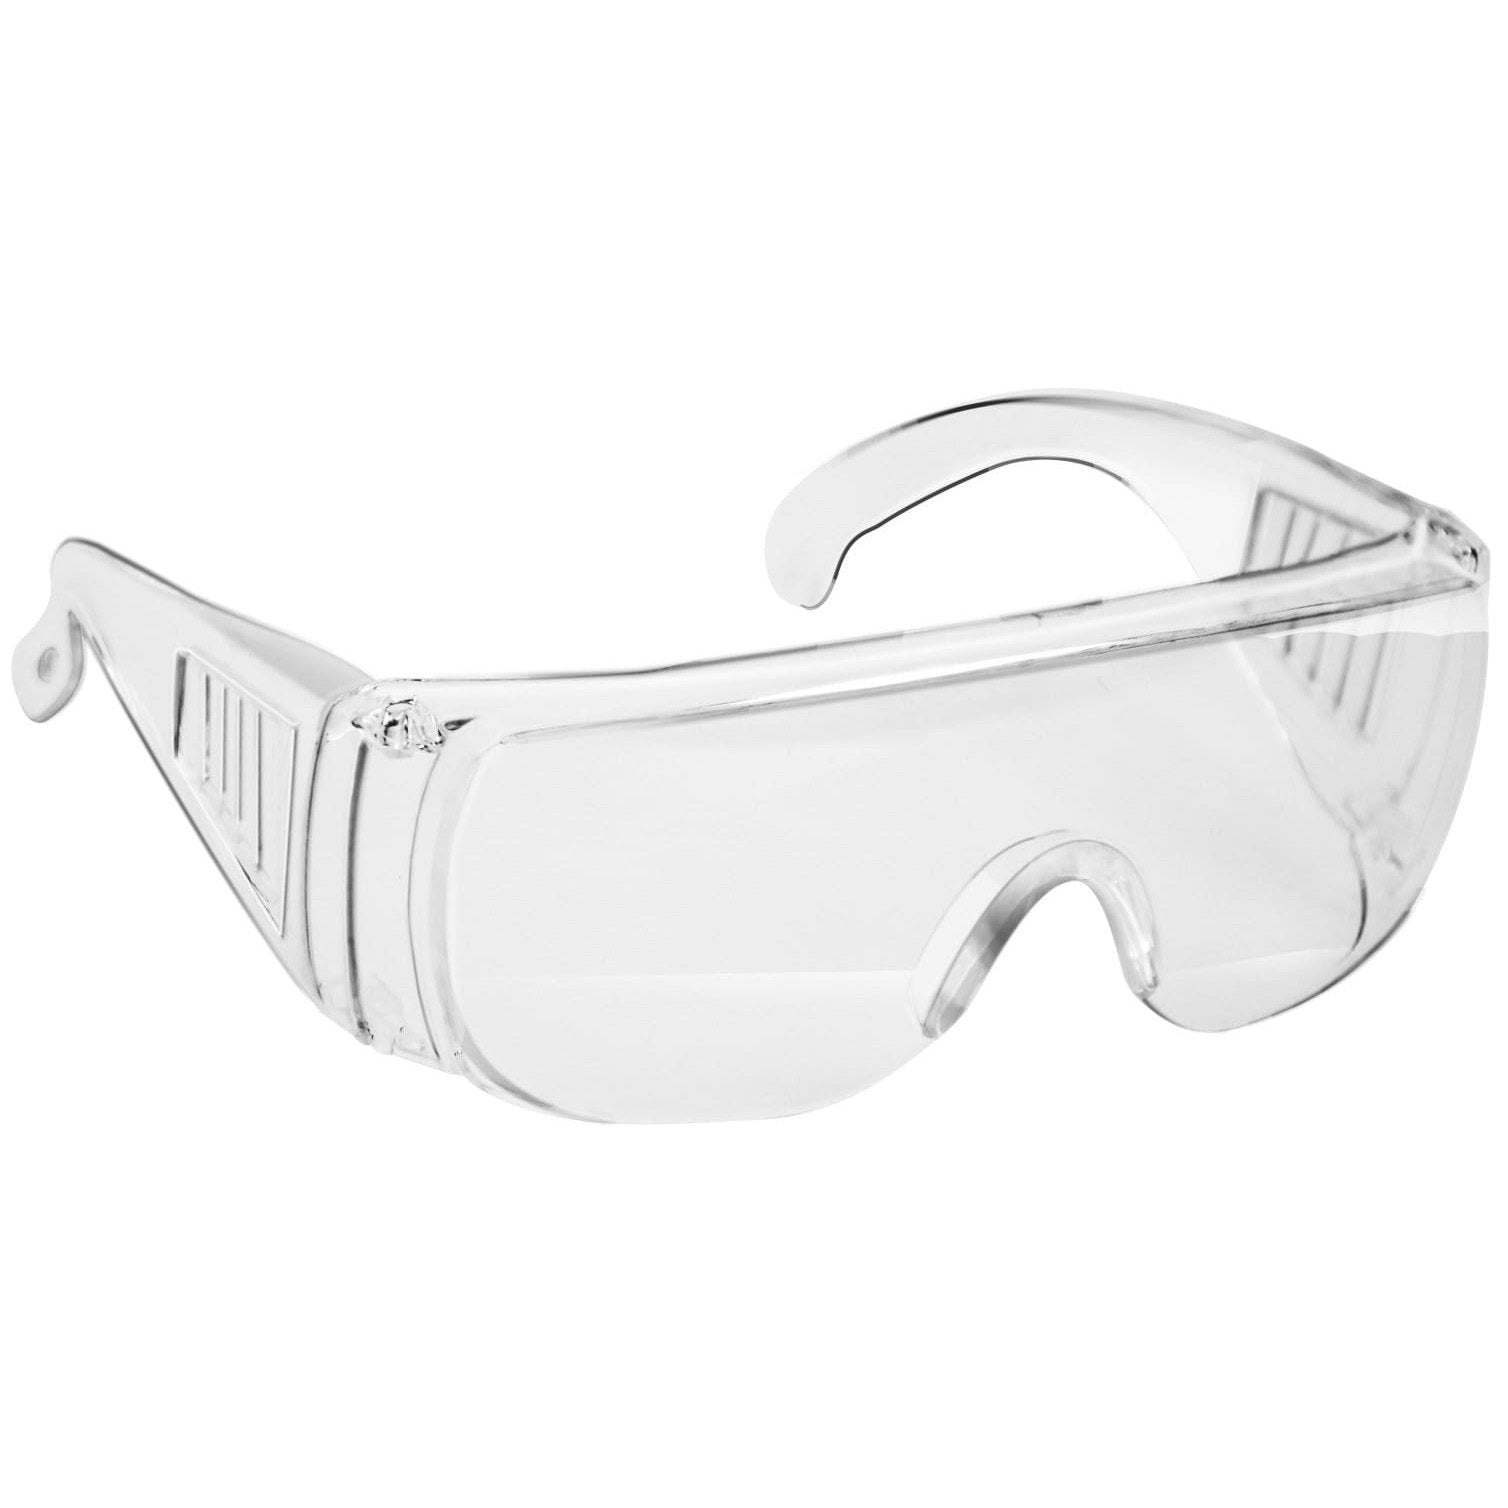 Ingco Safety Goggles - HSG05 | Supply Master | Accra, Ghana Tools Building Steel Engineering Hardware tool